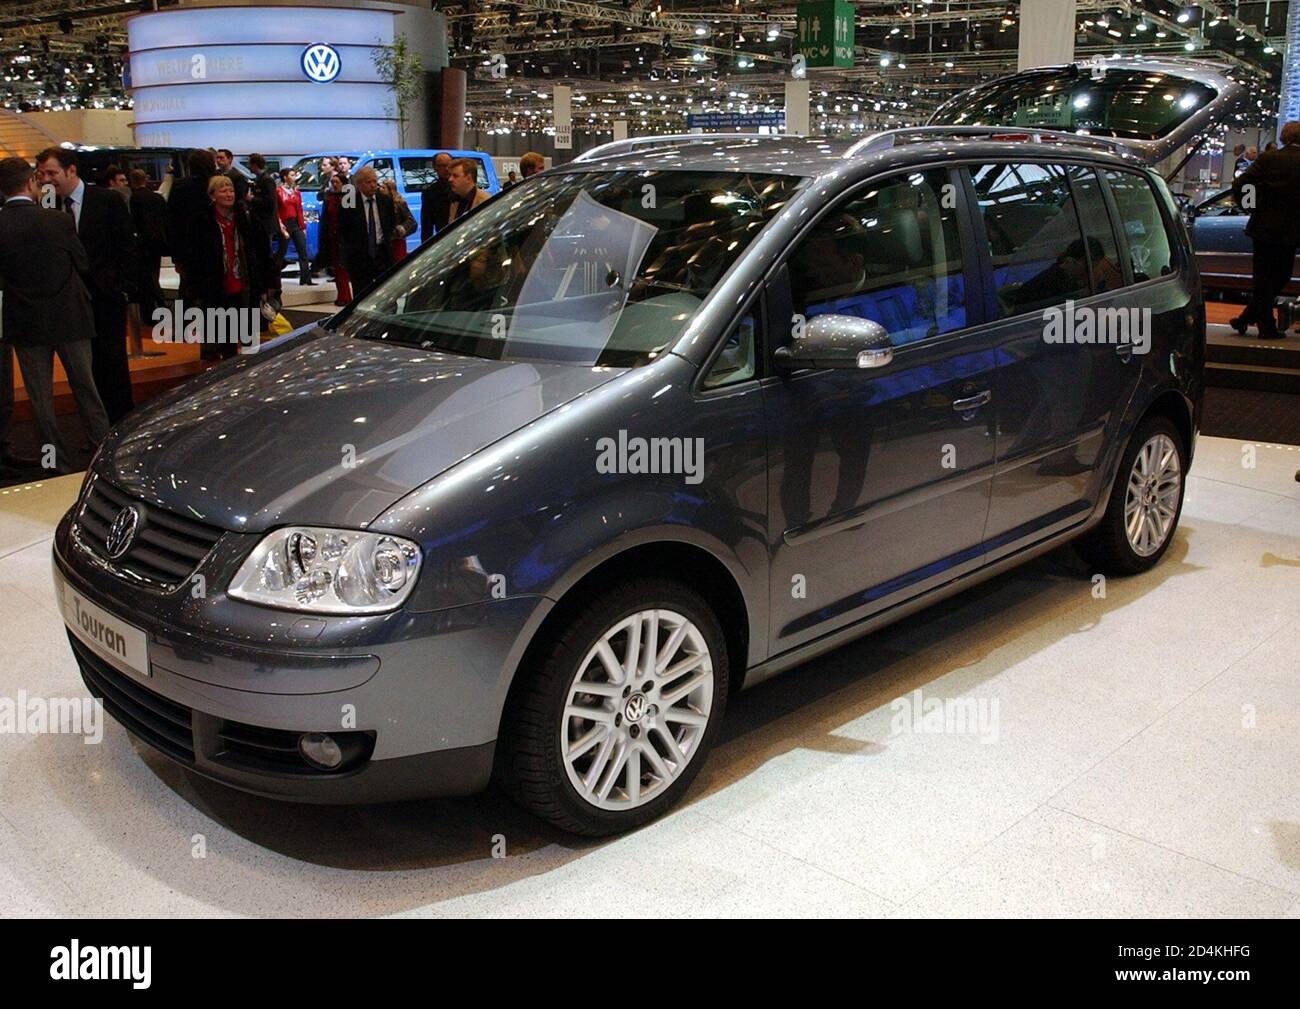 Page 3 - Vw Volkswagen Touran High Resolution Stock Photography and Images  - Alamy